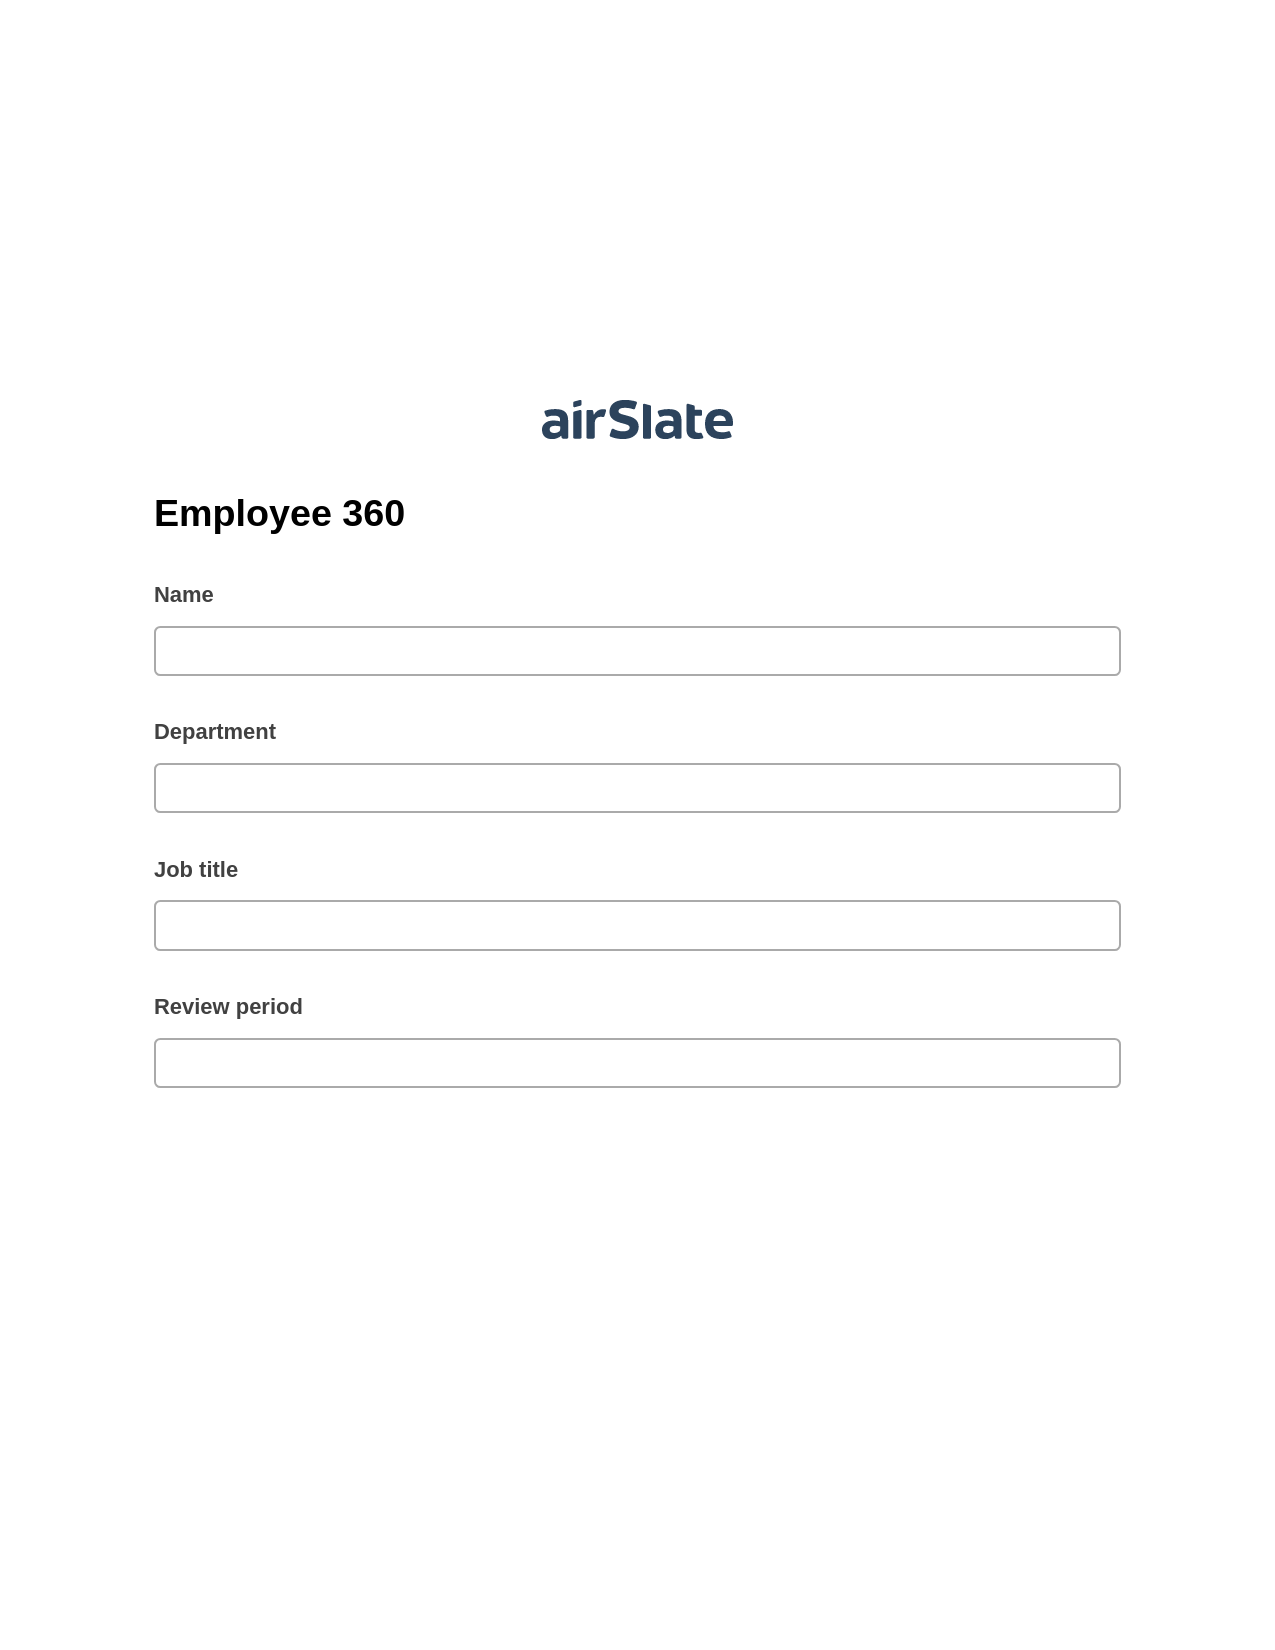 Employee 360 Pre-fill Dropdowns from Google Sheet Bot, Update MS Dynamics 365 Record Bot, Export to Smartsheet